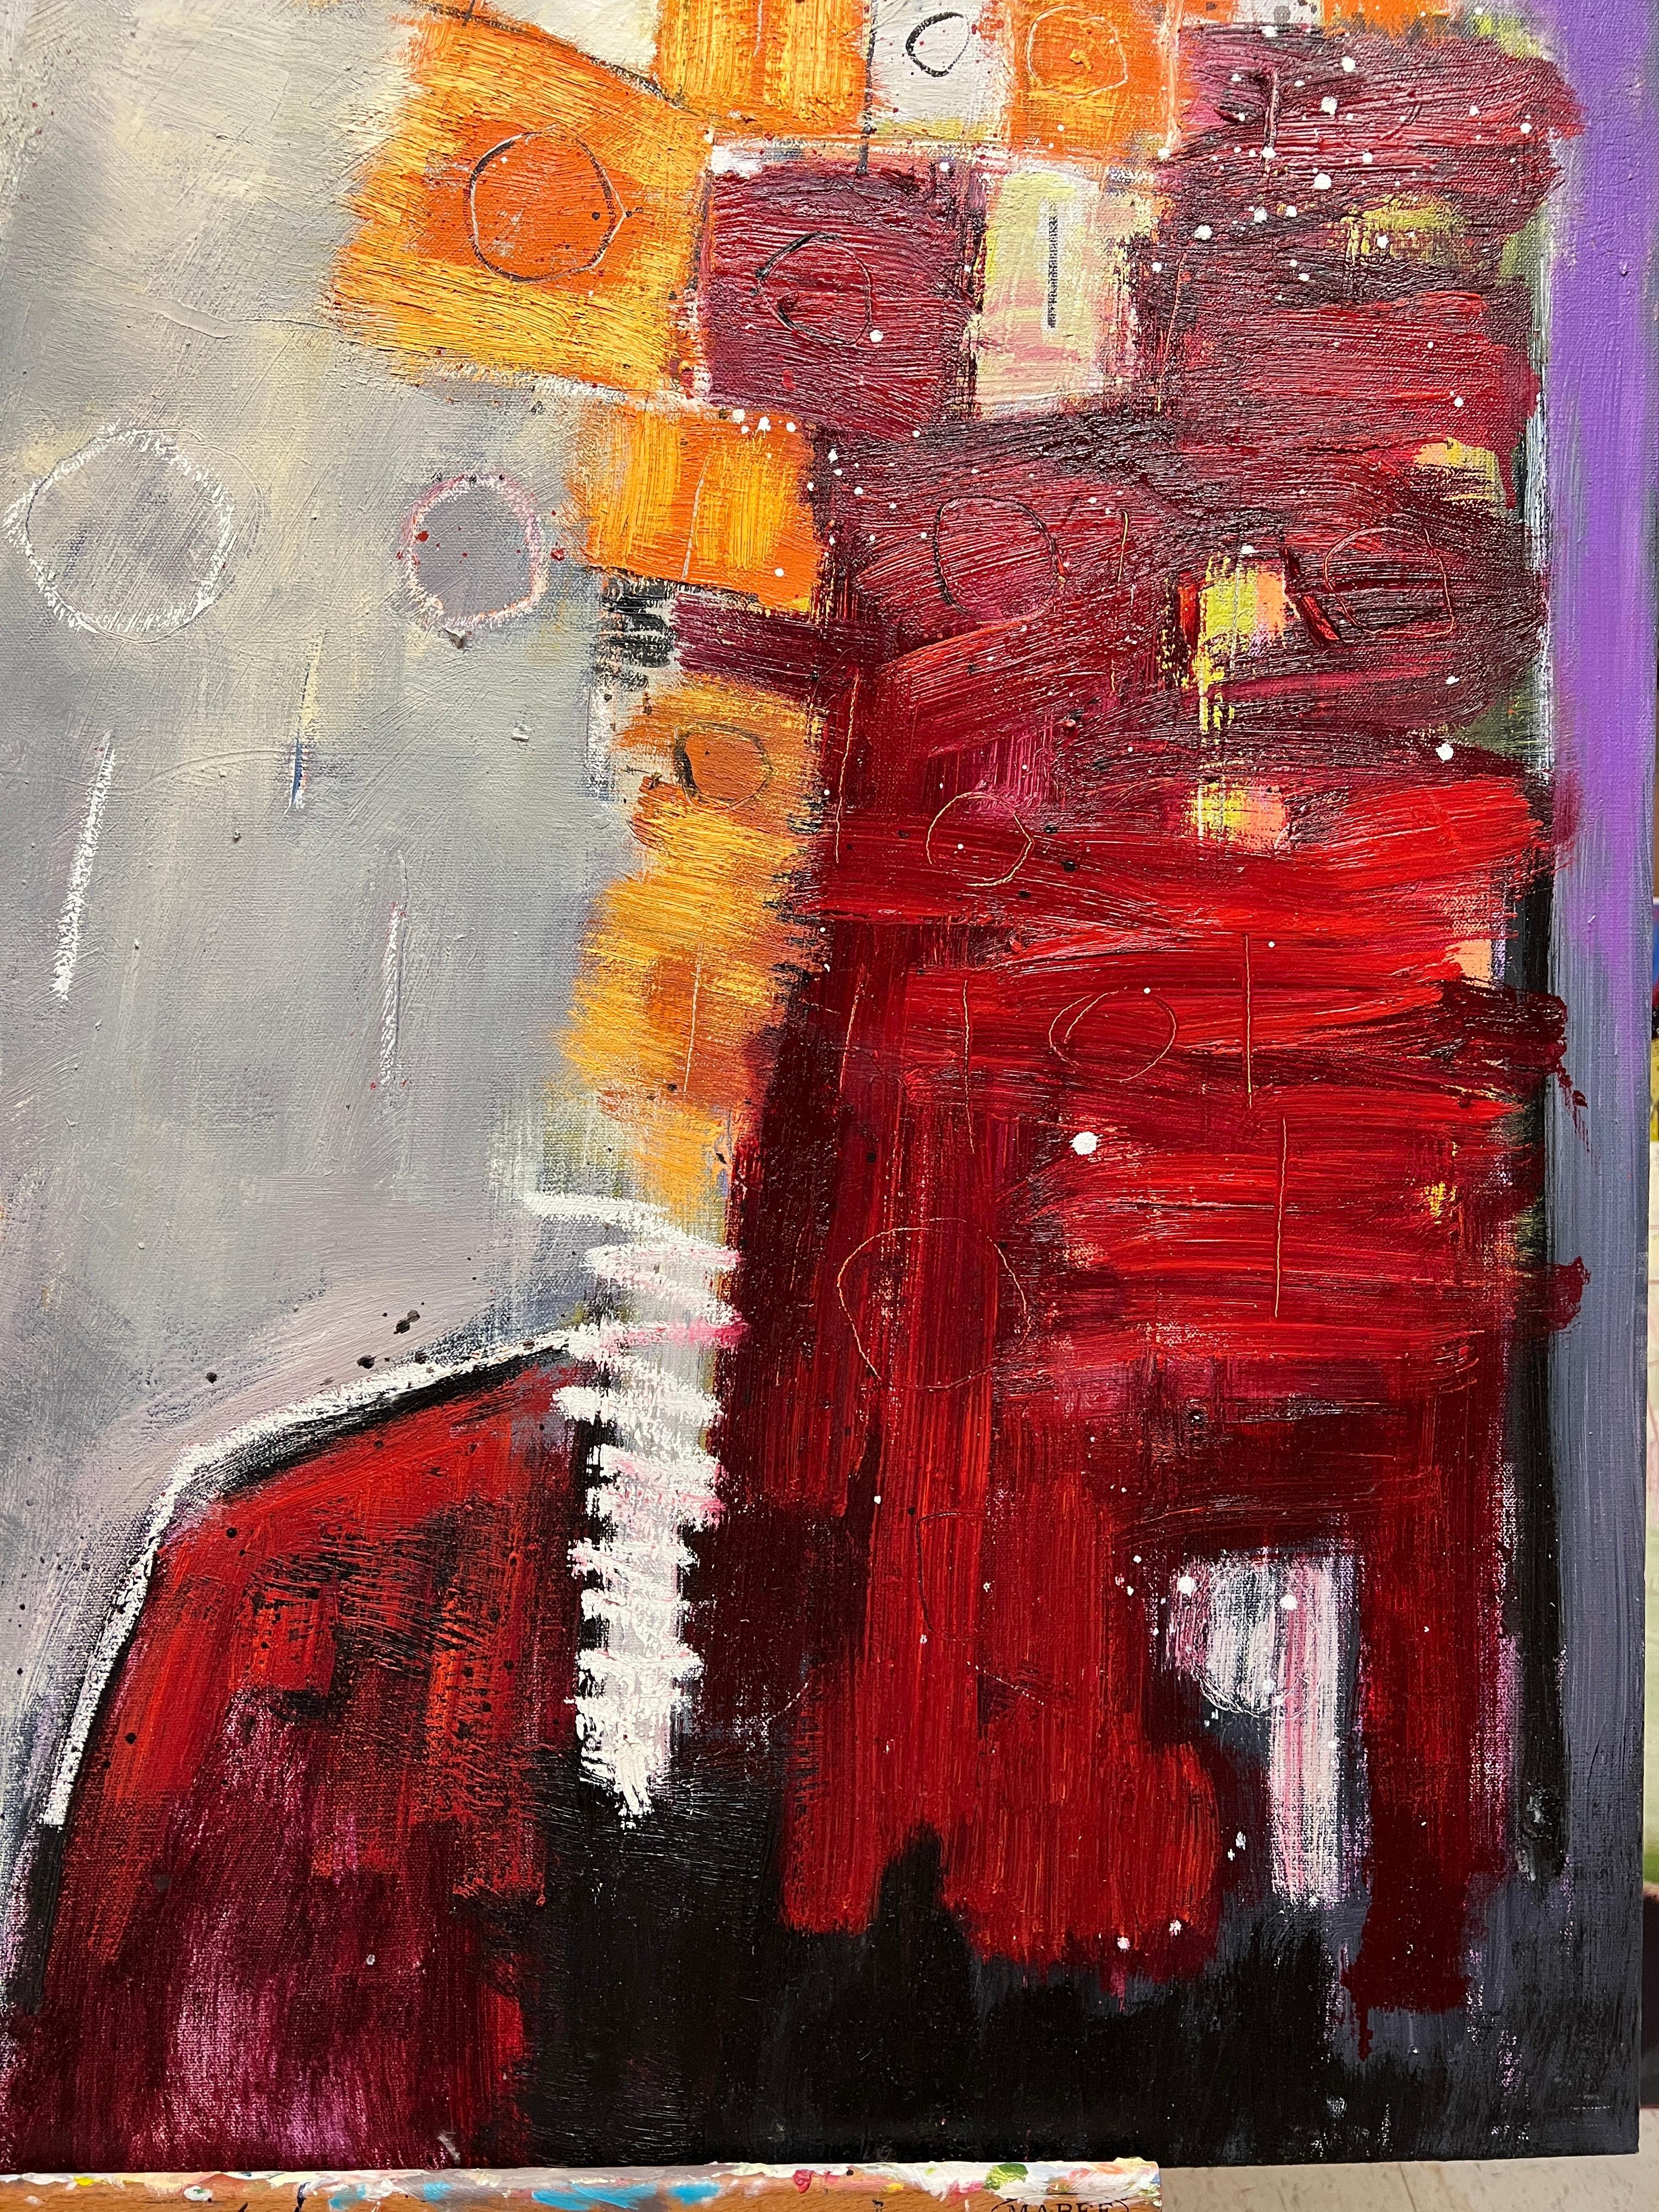 Trojan Horse No. 2: Contemporary Abstract Oil Painting Purple Orange Red - Brown Abstract Painting by David Richardson